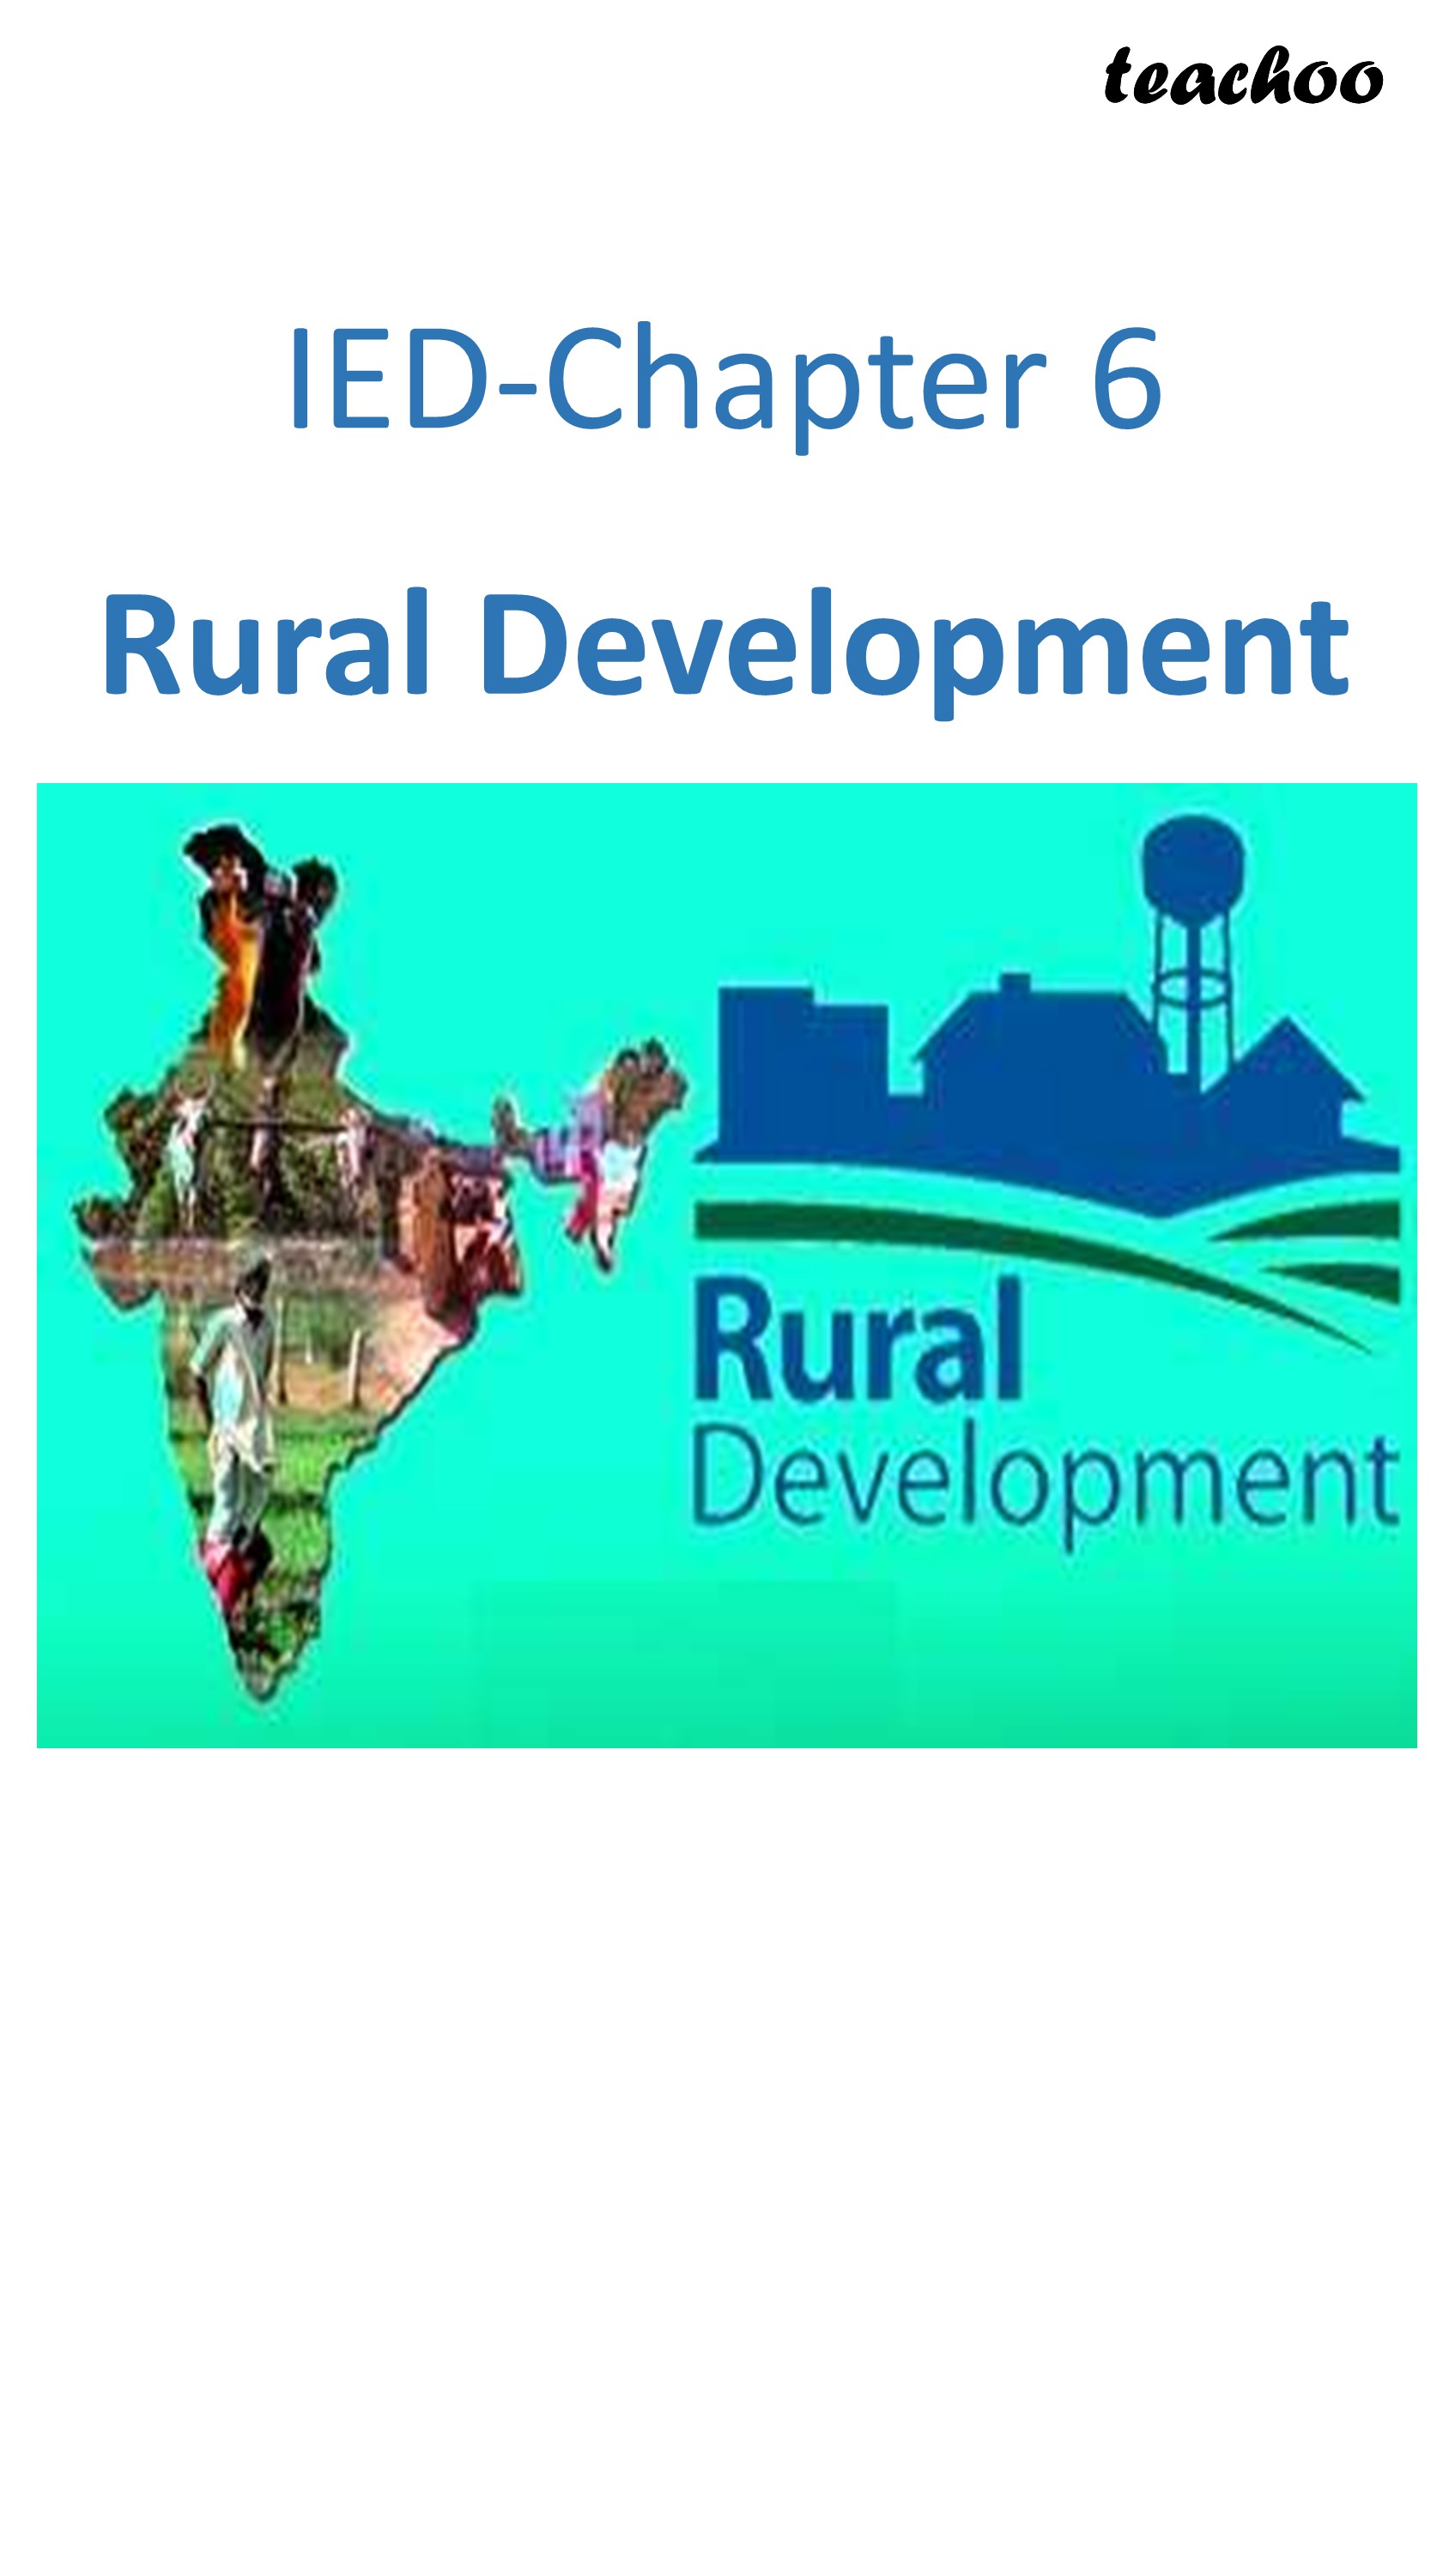 case study on rural development for class 12